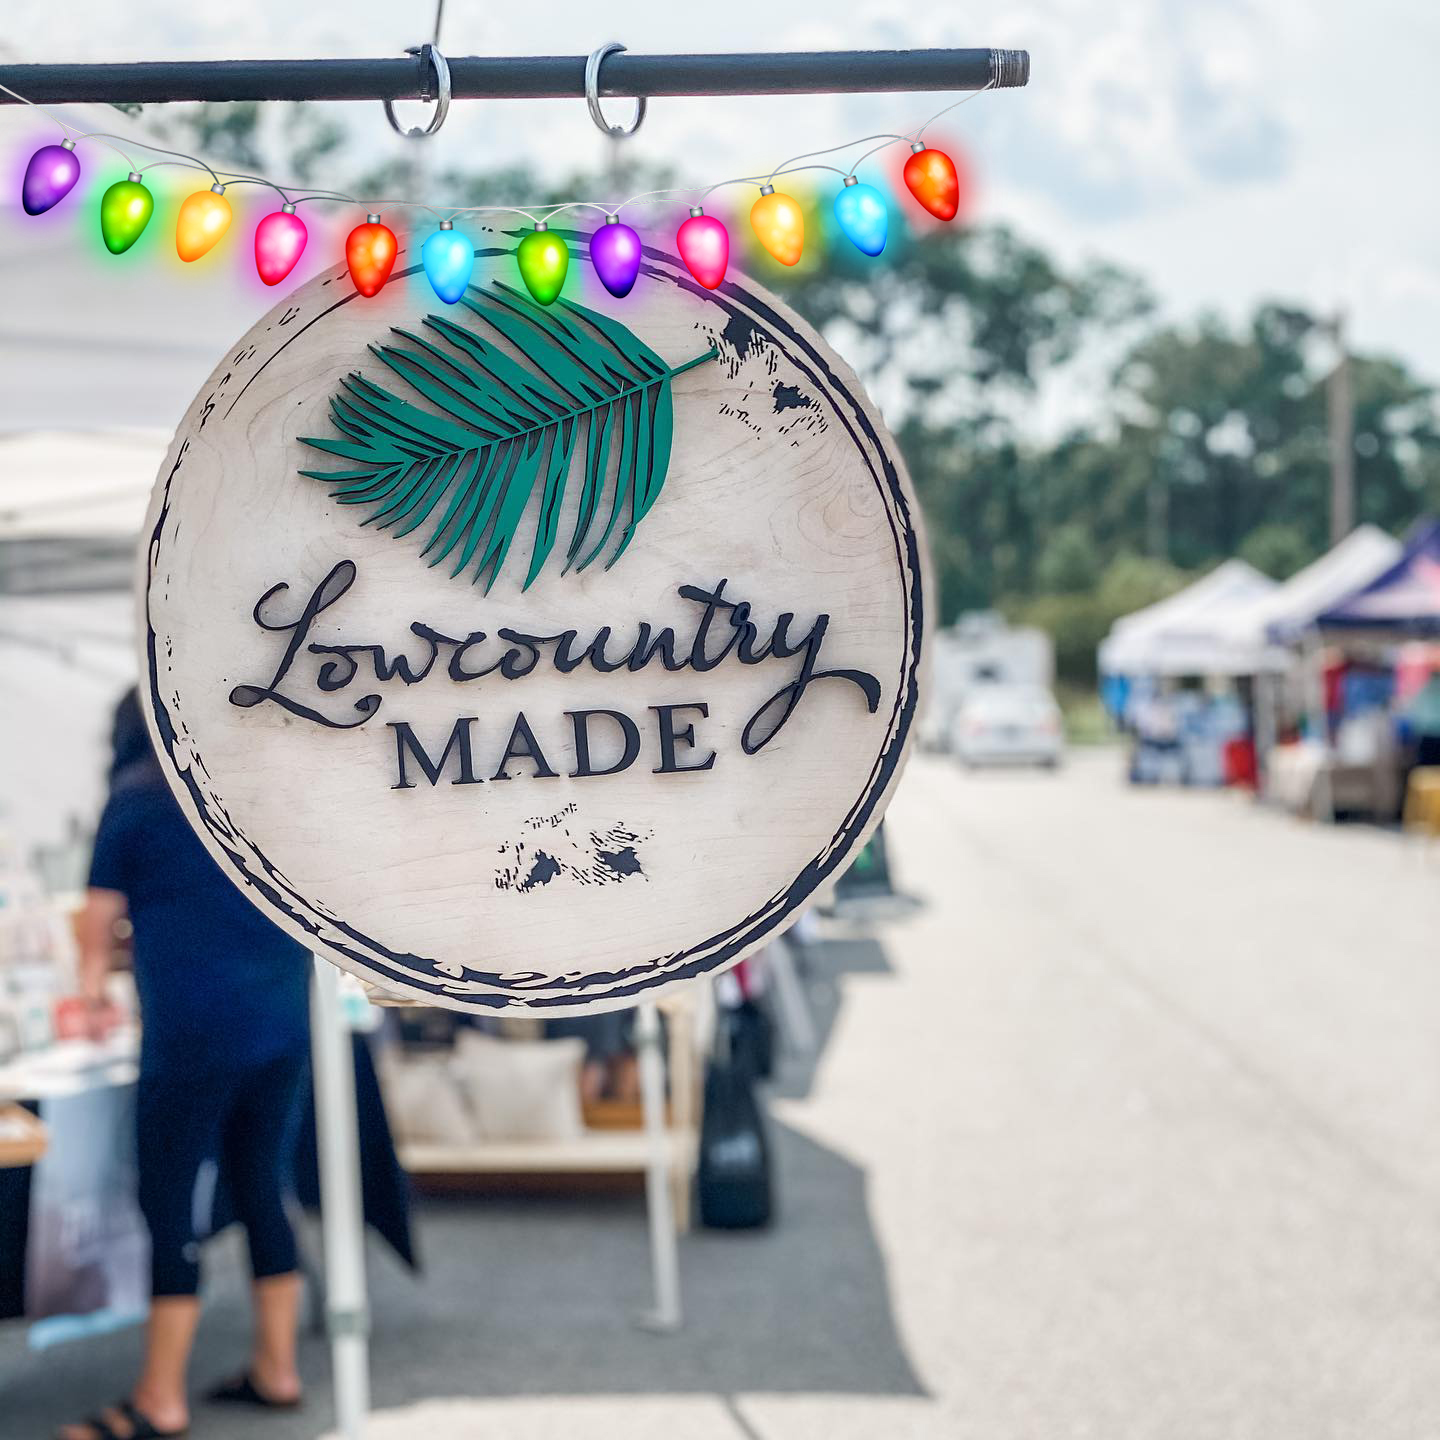 Lowcountry Made Bluffton Christmas Market